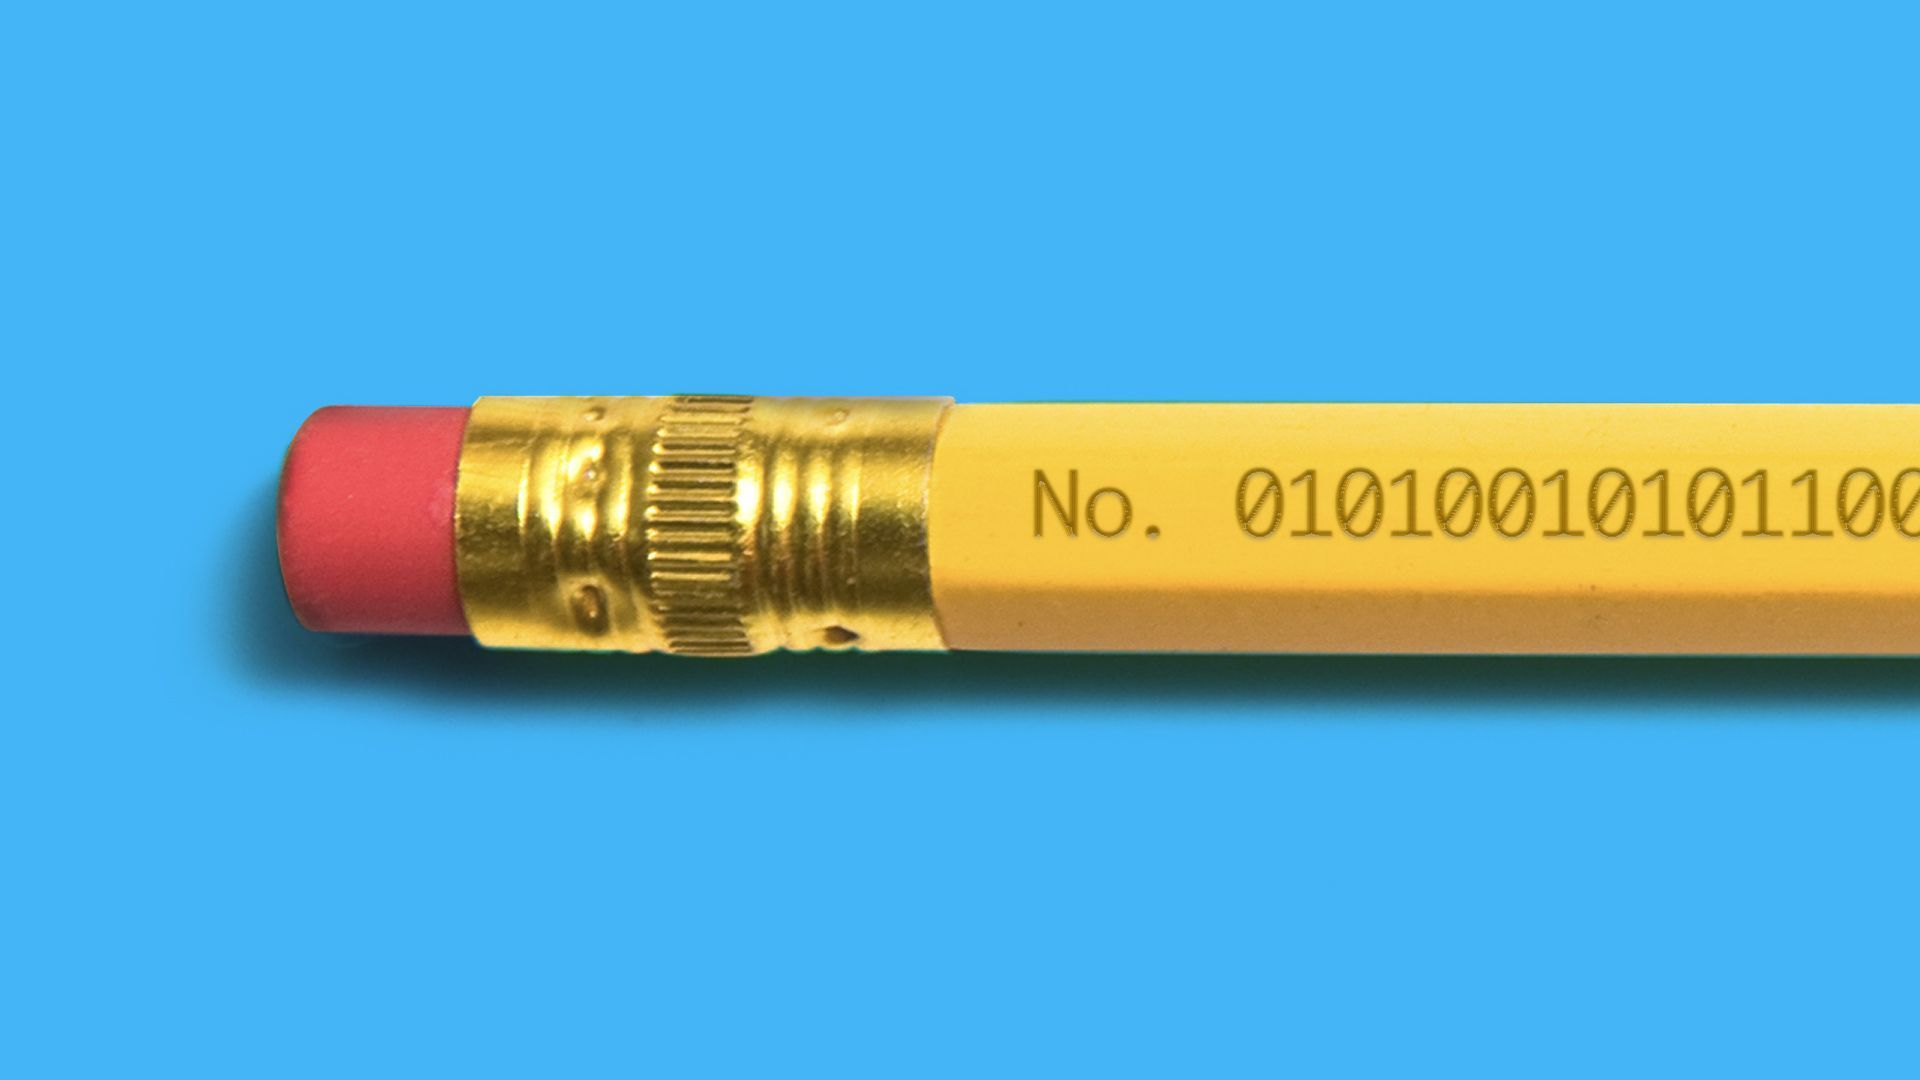 Illustration of a pencil with binary engraved on it